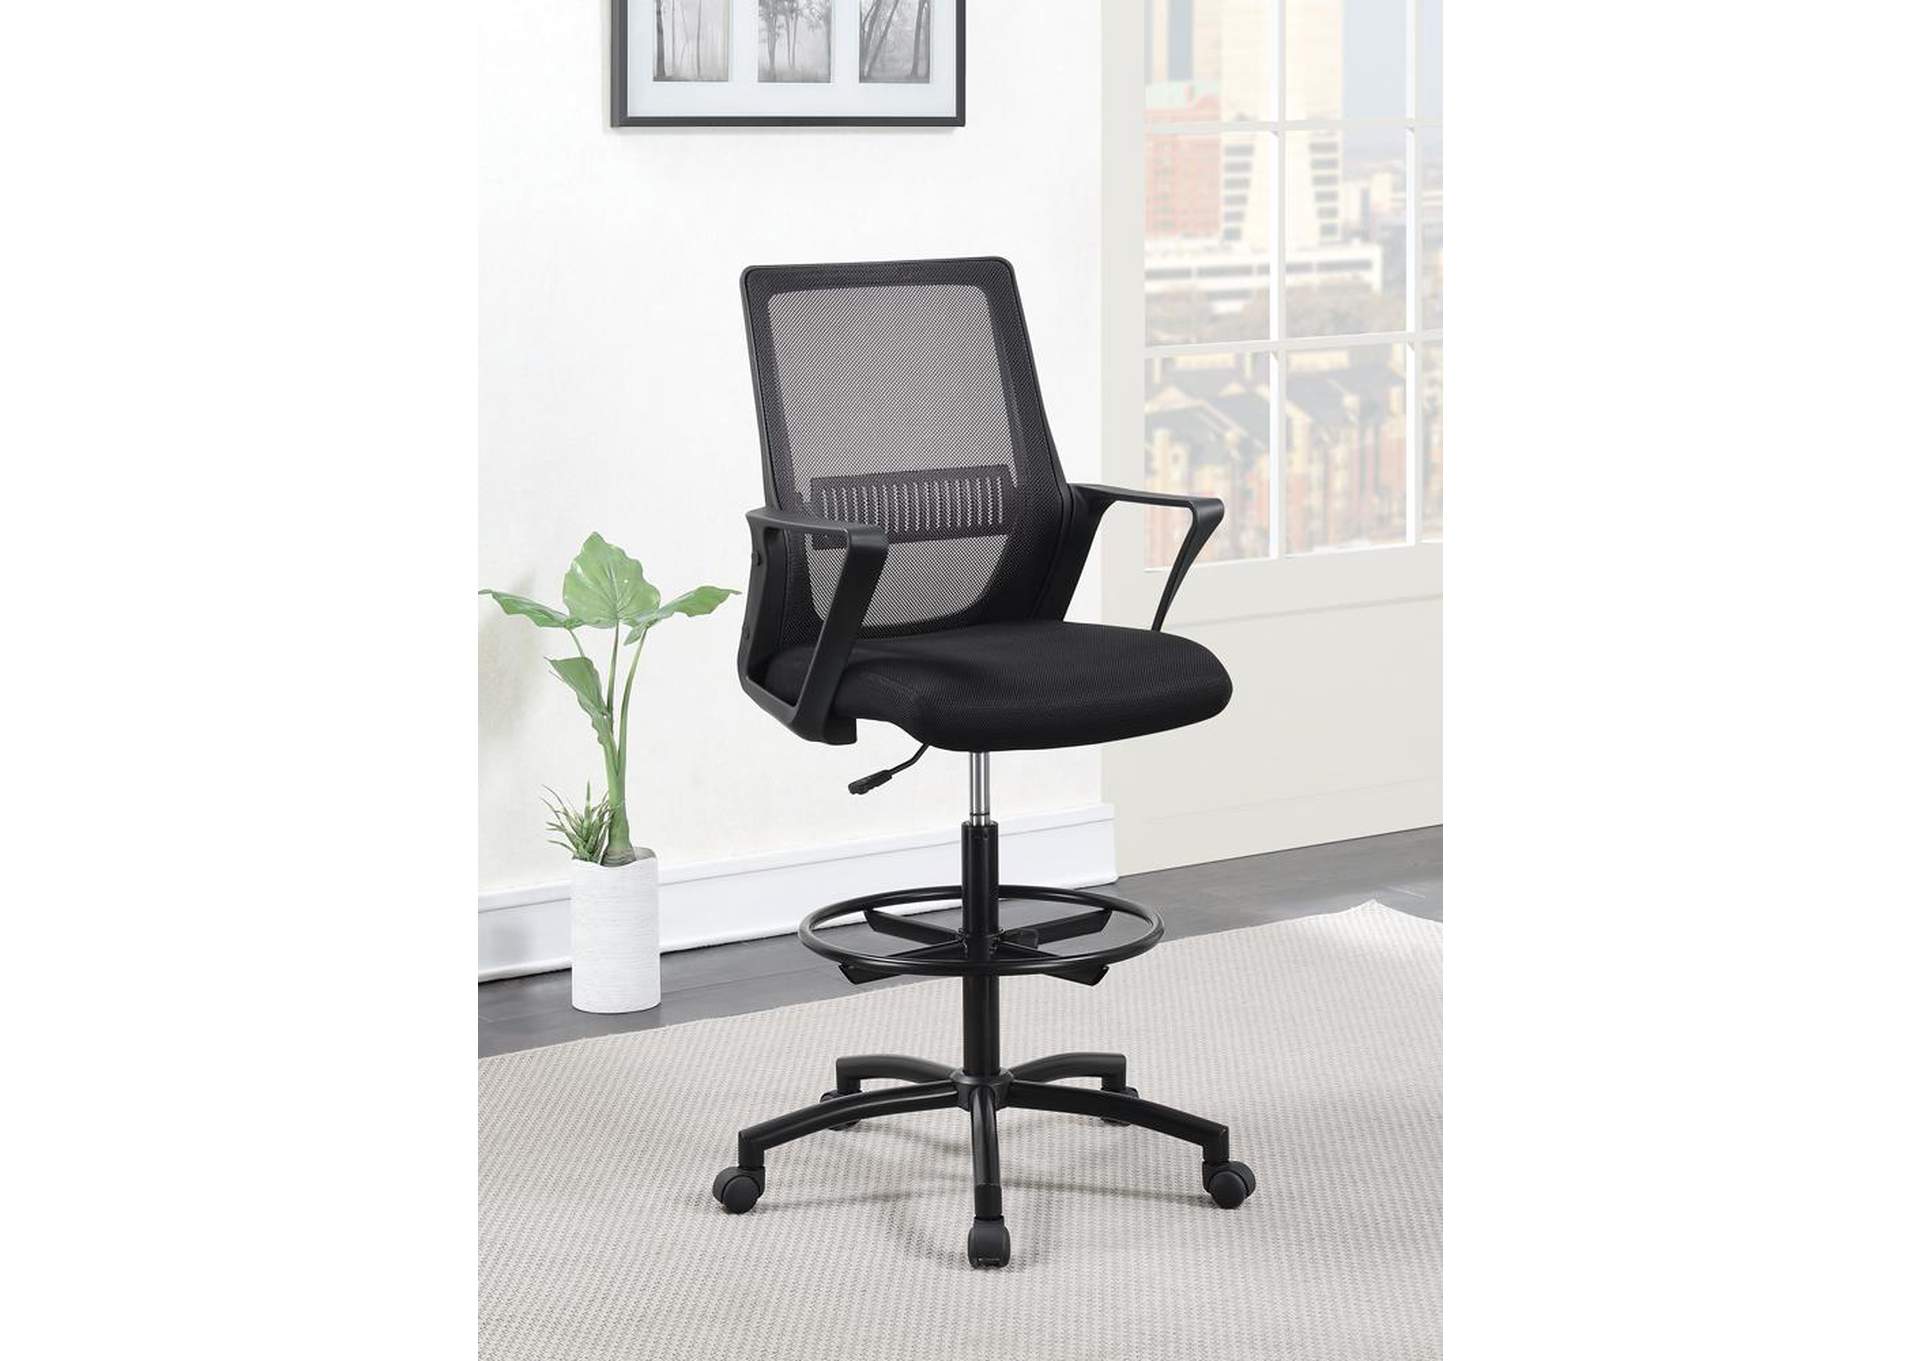 King Of Chairs Black Tall Office Chair